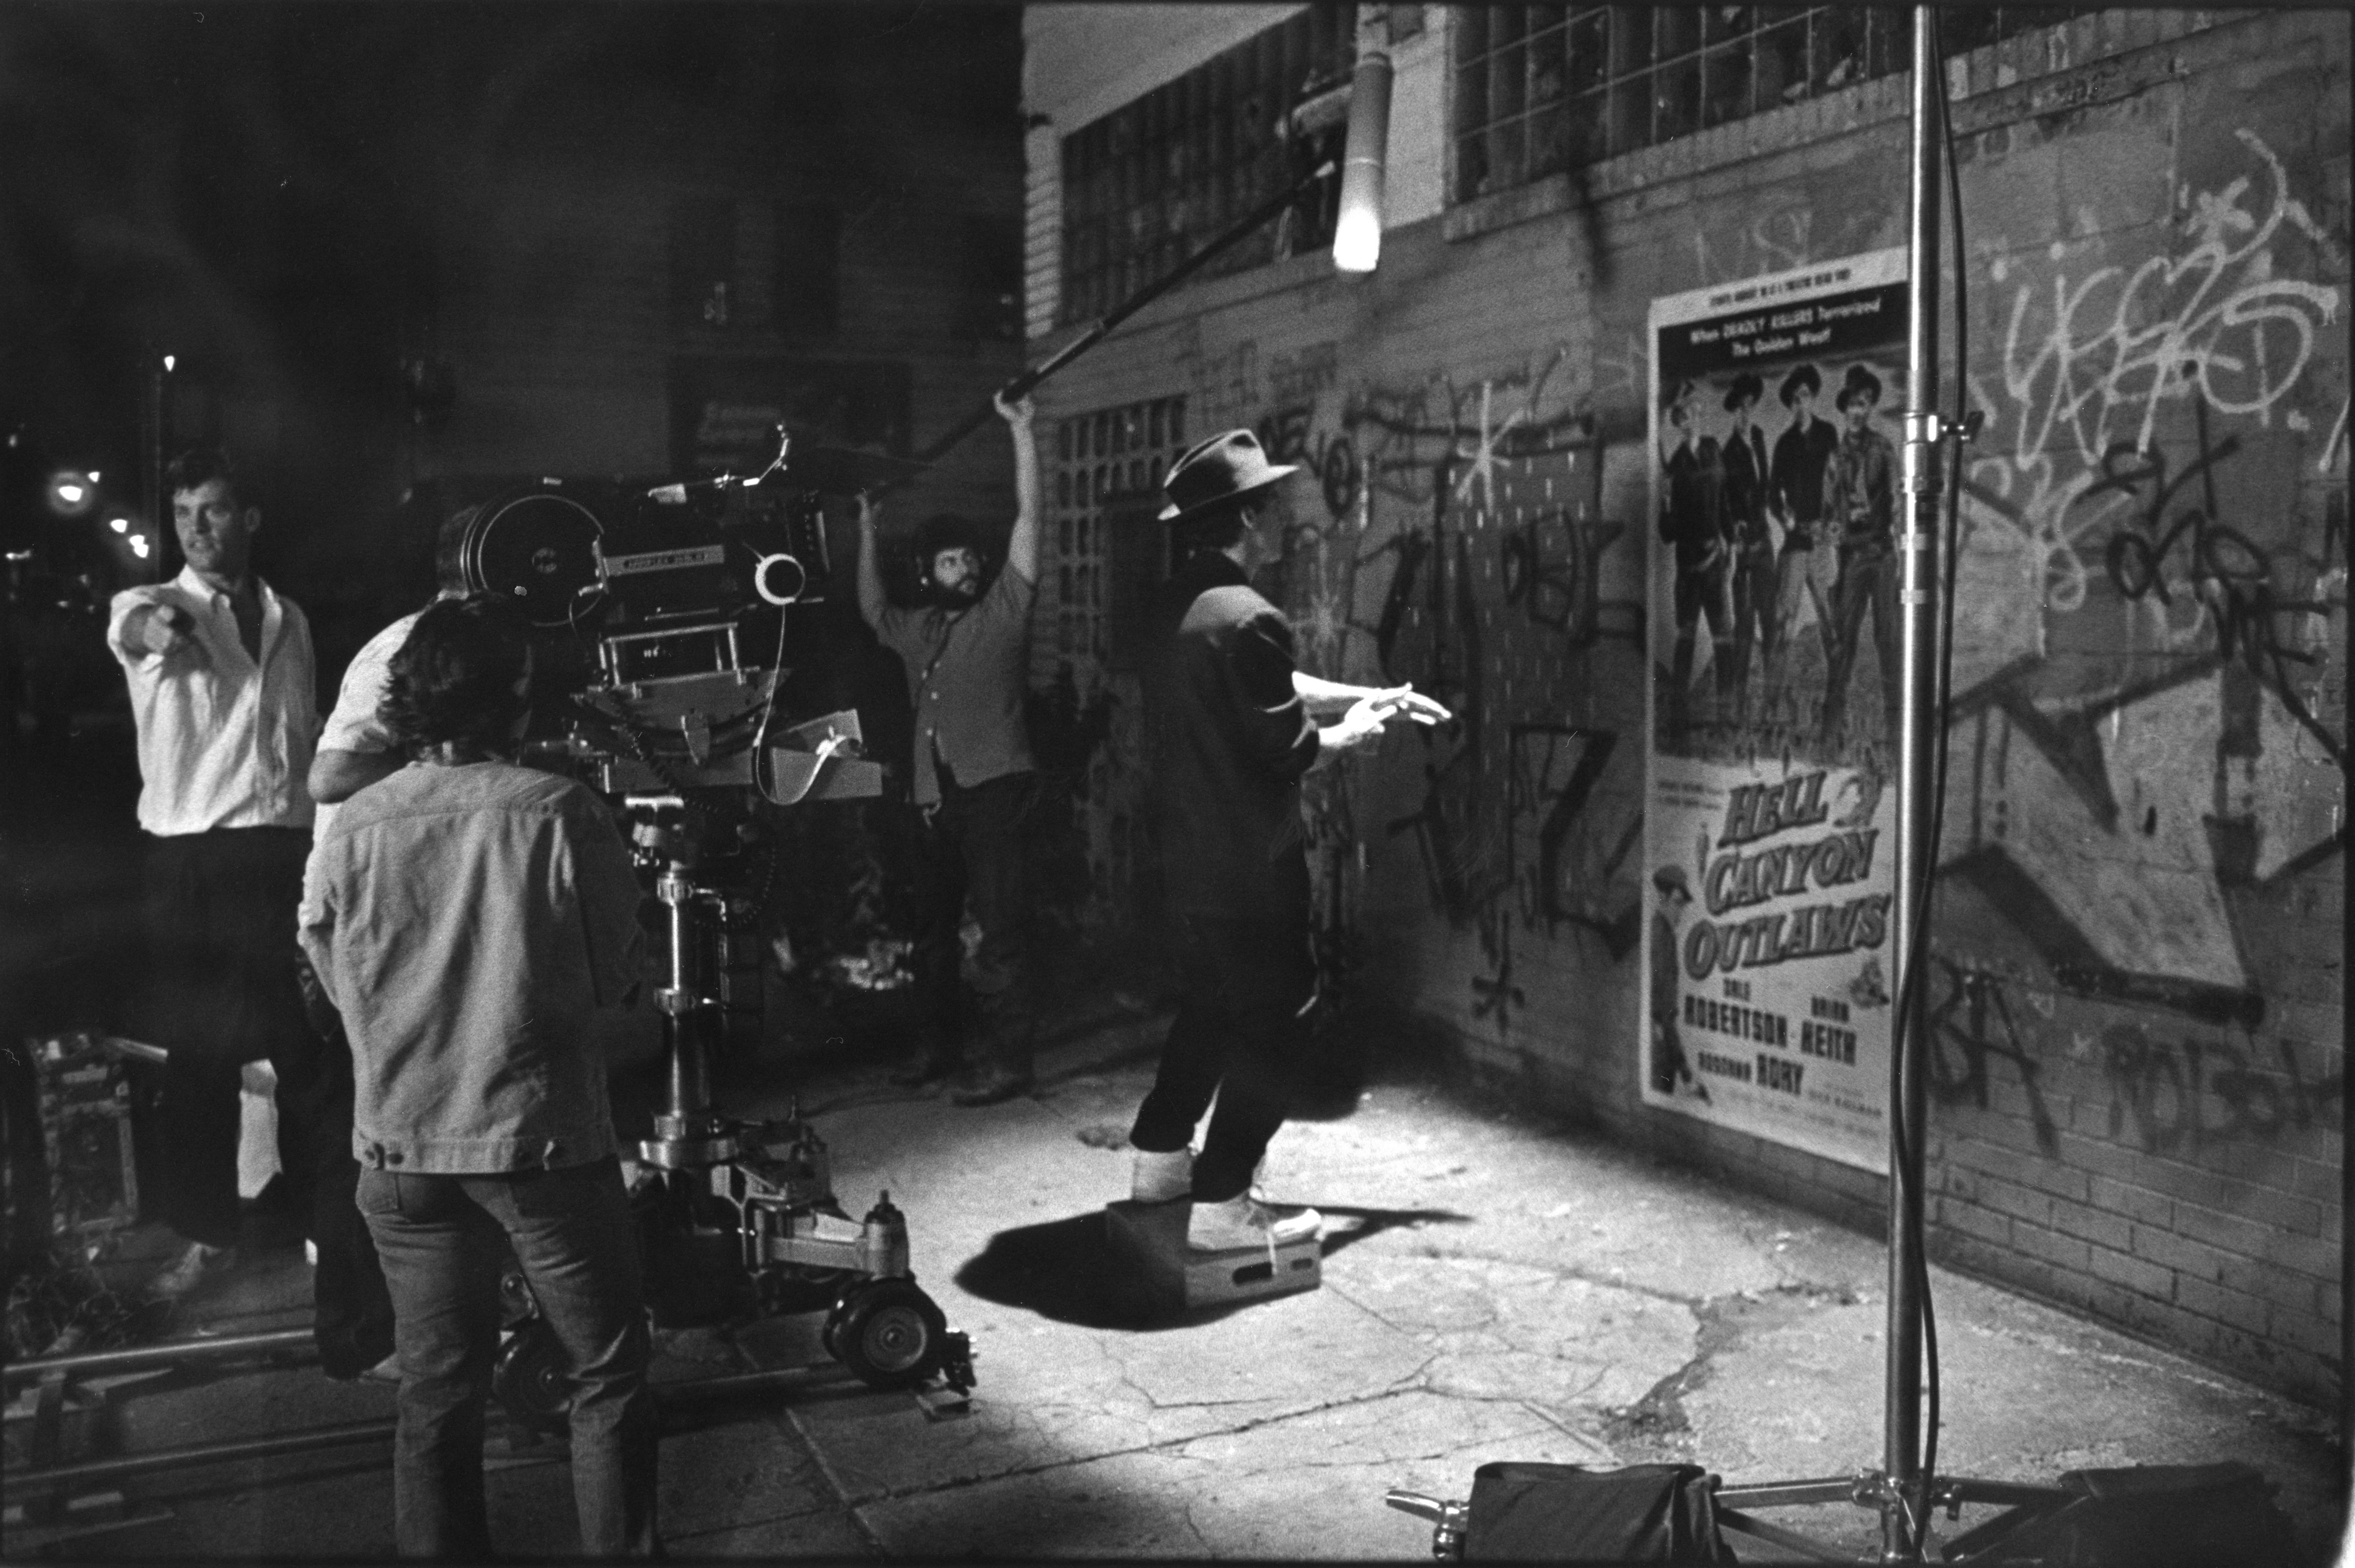 BRUCE MACWILLIAMS Directs Feature Film, REAL COWBOY in South Bronx, NYC (On left in White)